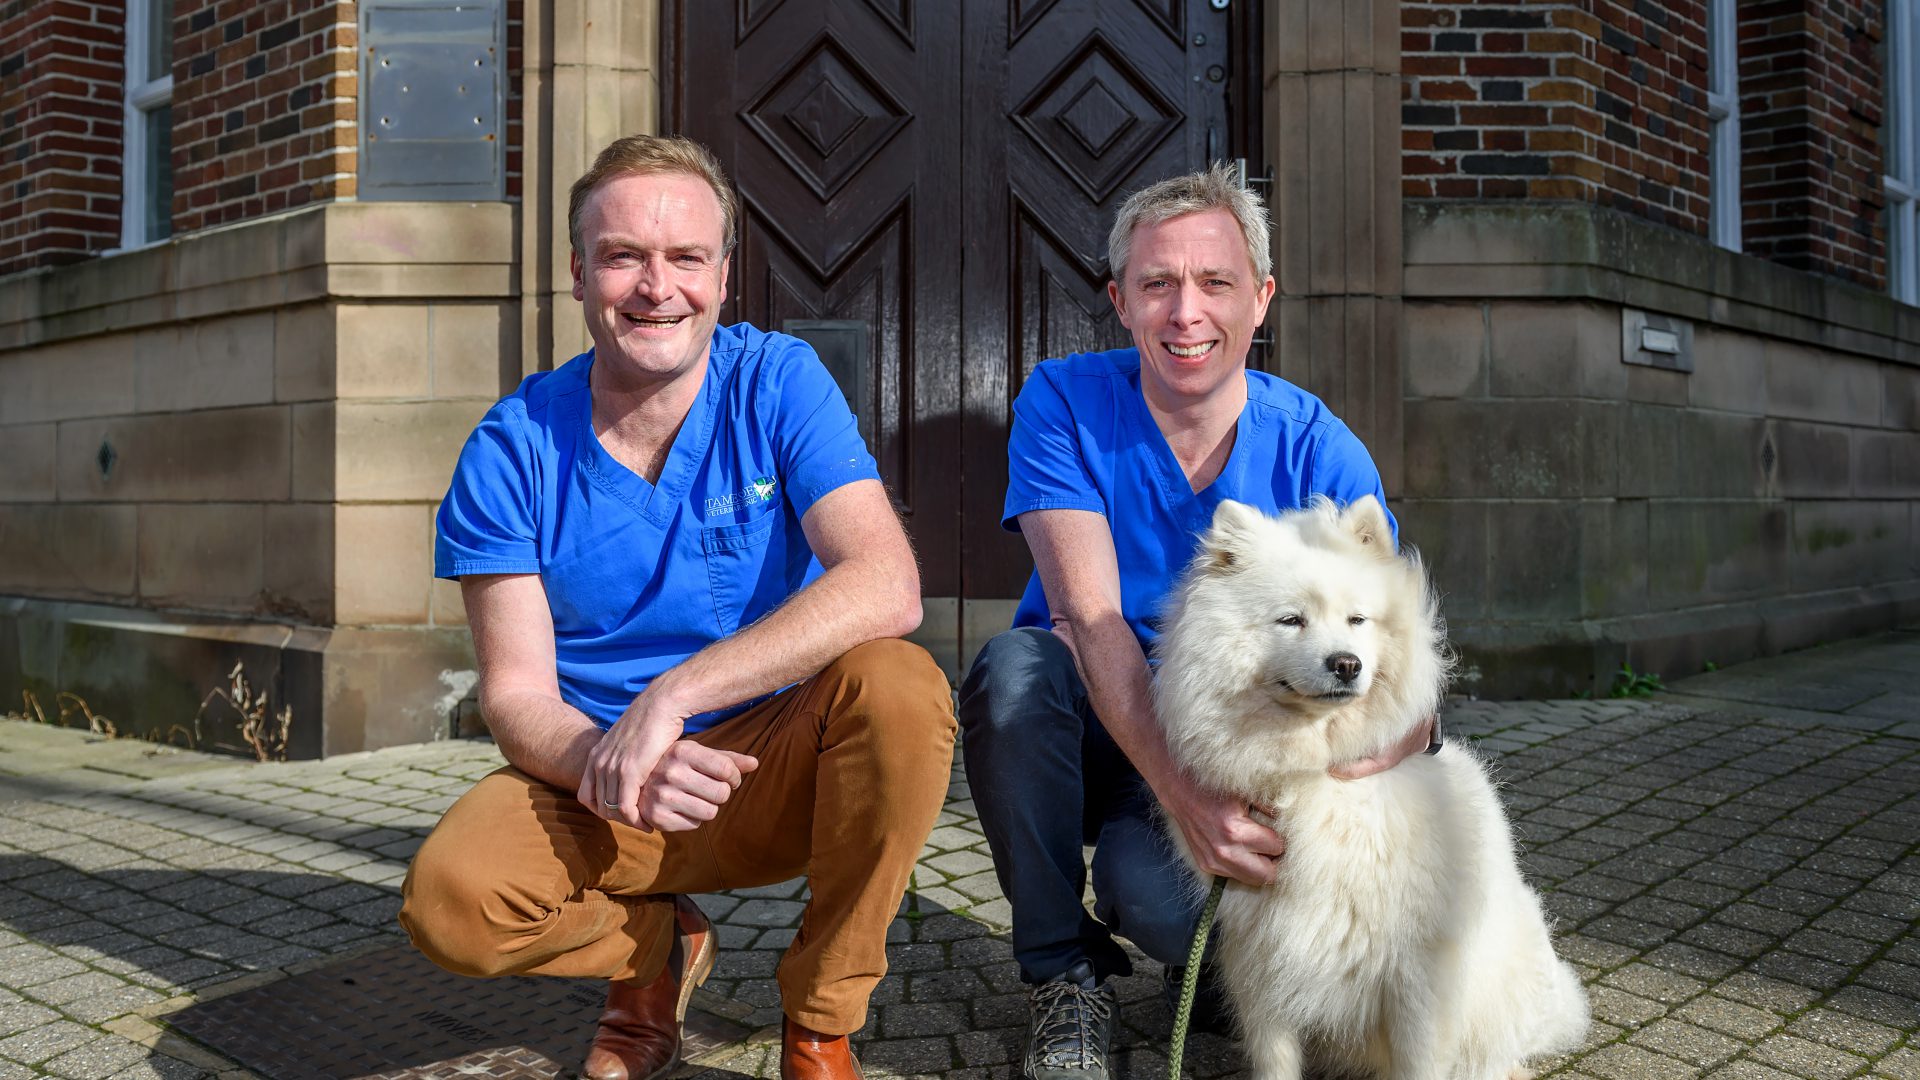 From pounds to hounds! Greater Manchester vet practice expands